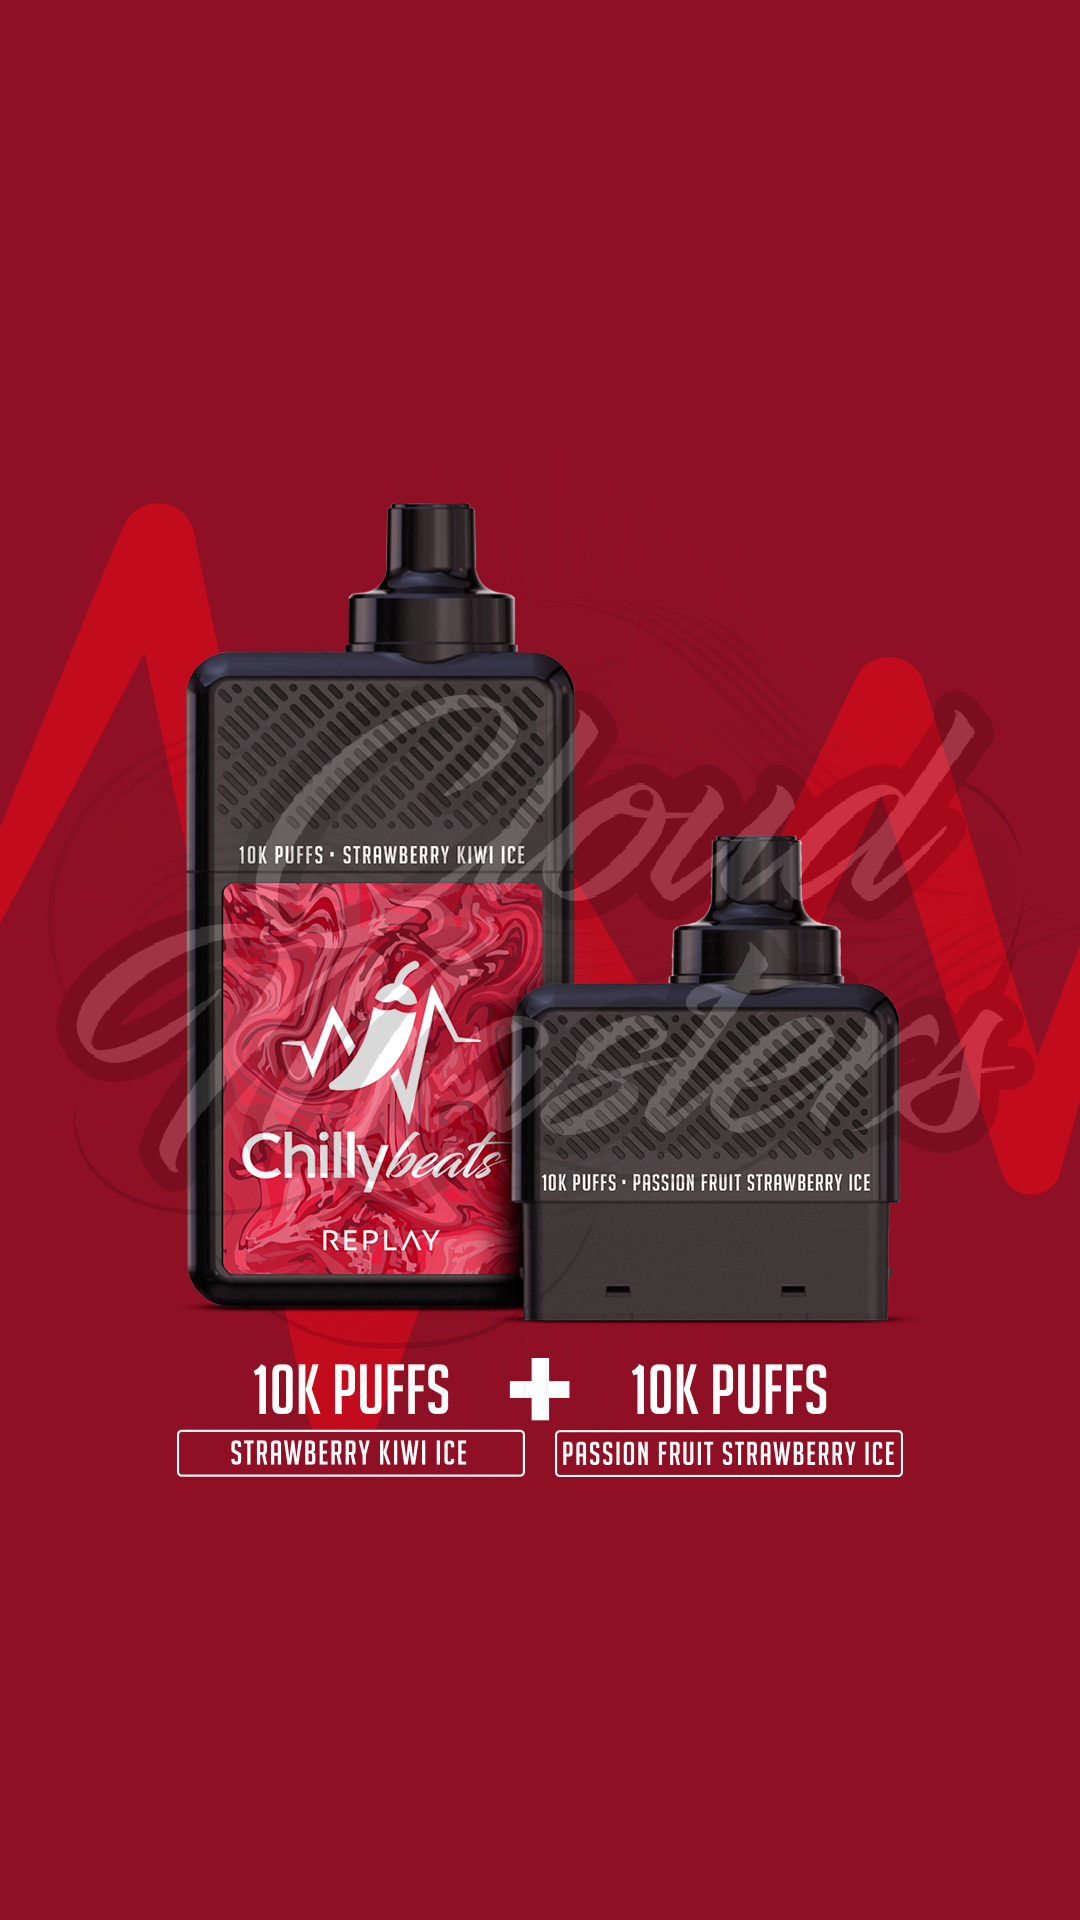 Chilly Beats Replay 20k puffs – Strawberry Kiwi Ice + Passion Fruit Strawberry Ice – Vertical